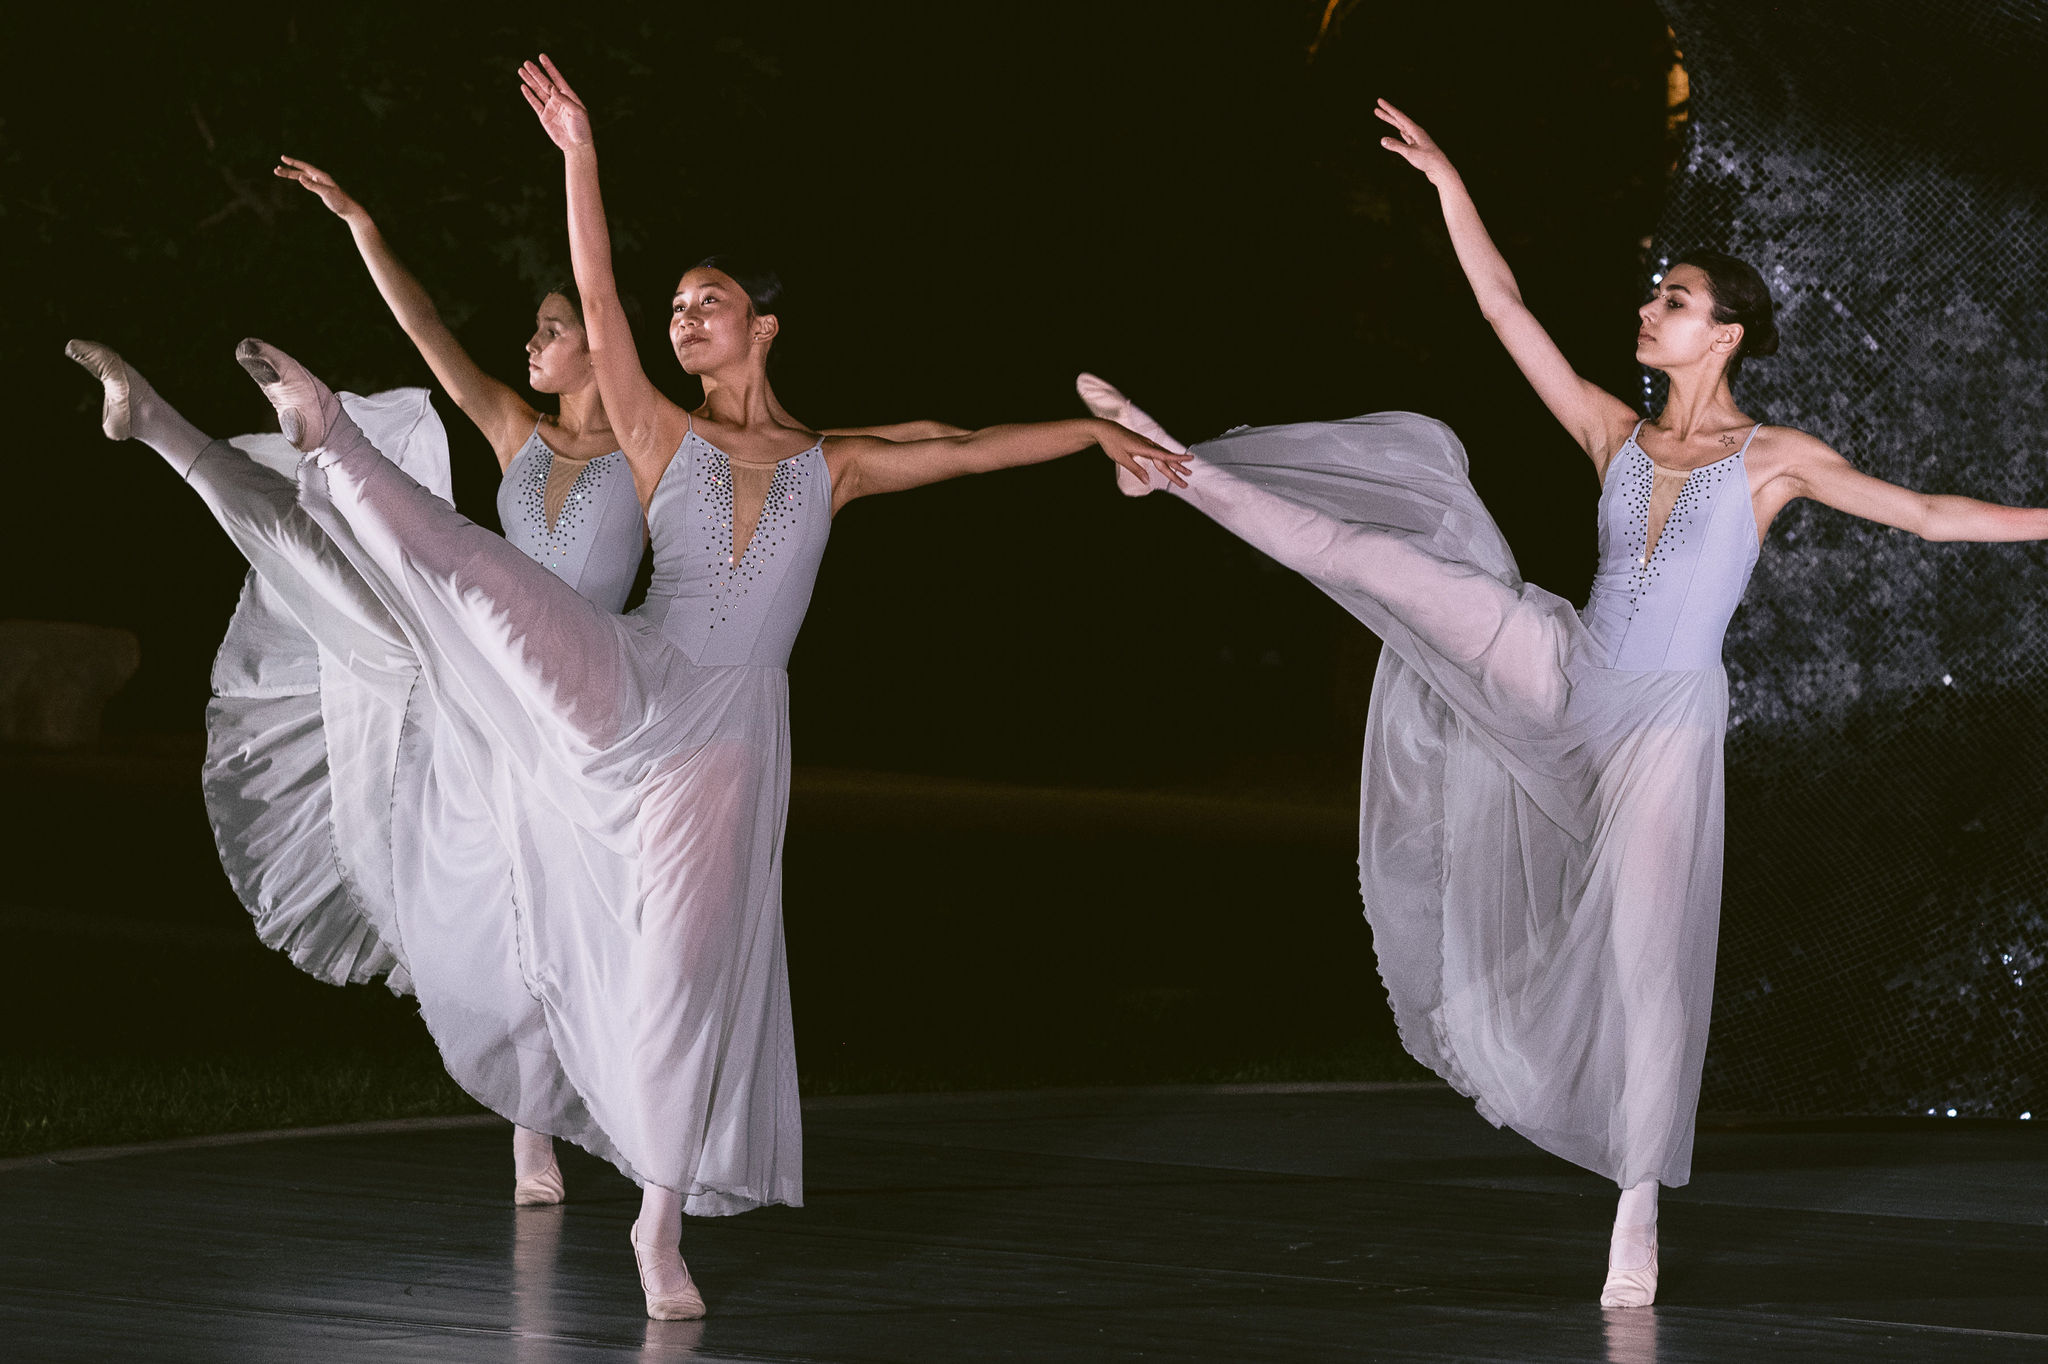 Three ballerinas in white costumes dance on stage